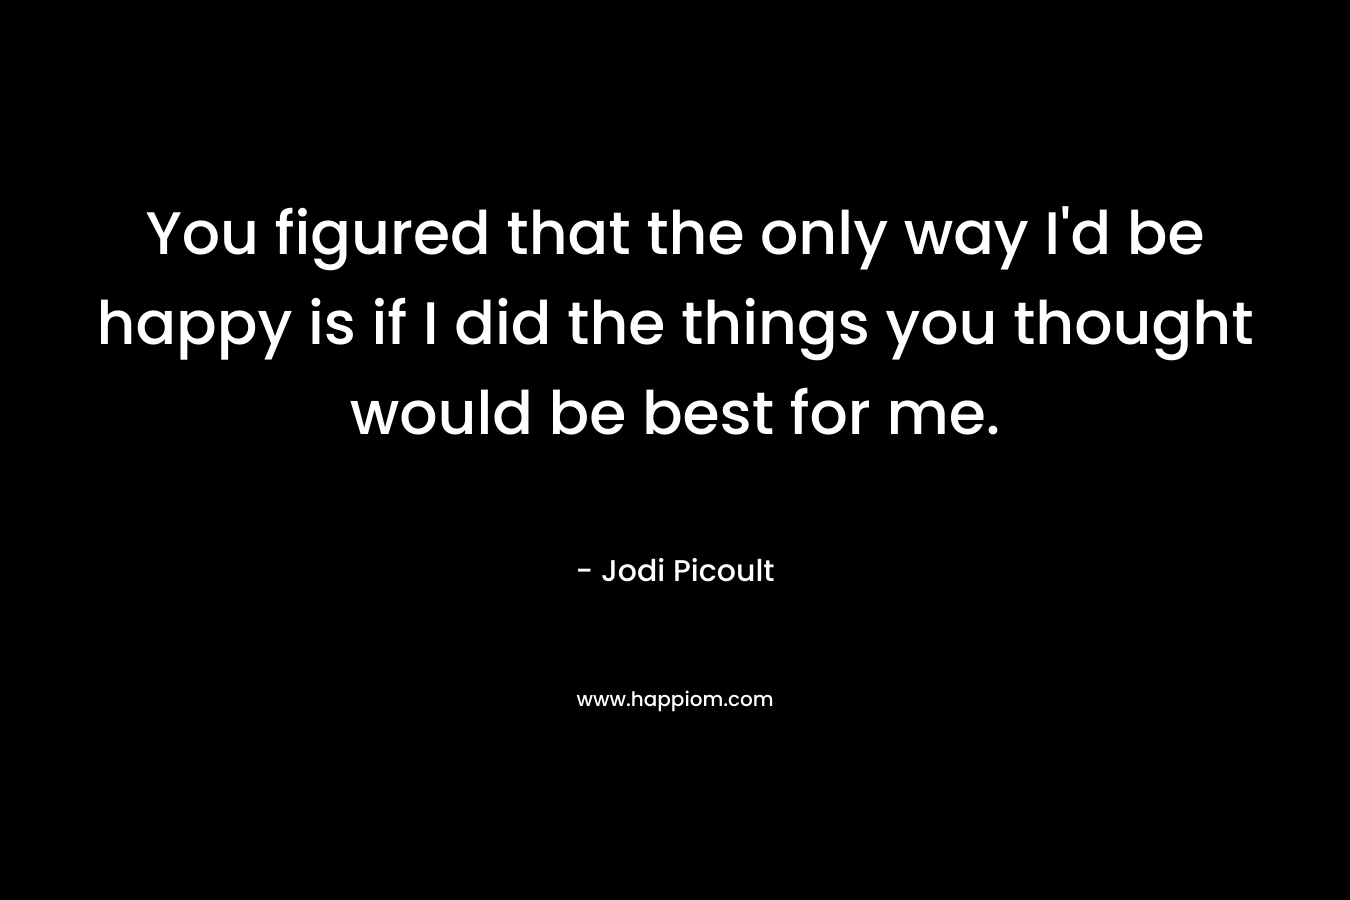 You figured that the only way I'd be happy is if I did the things you thought would be best for me.